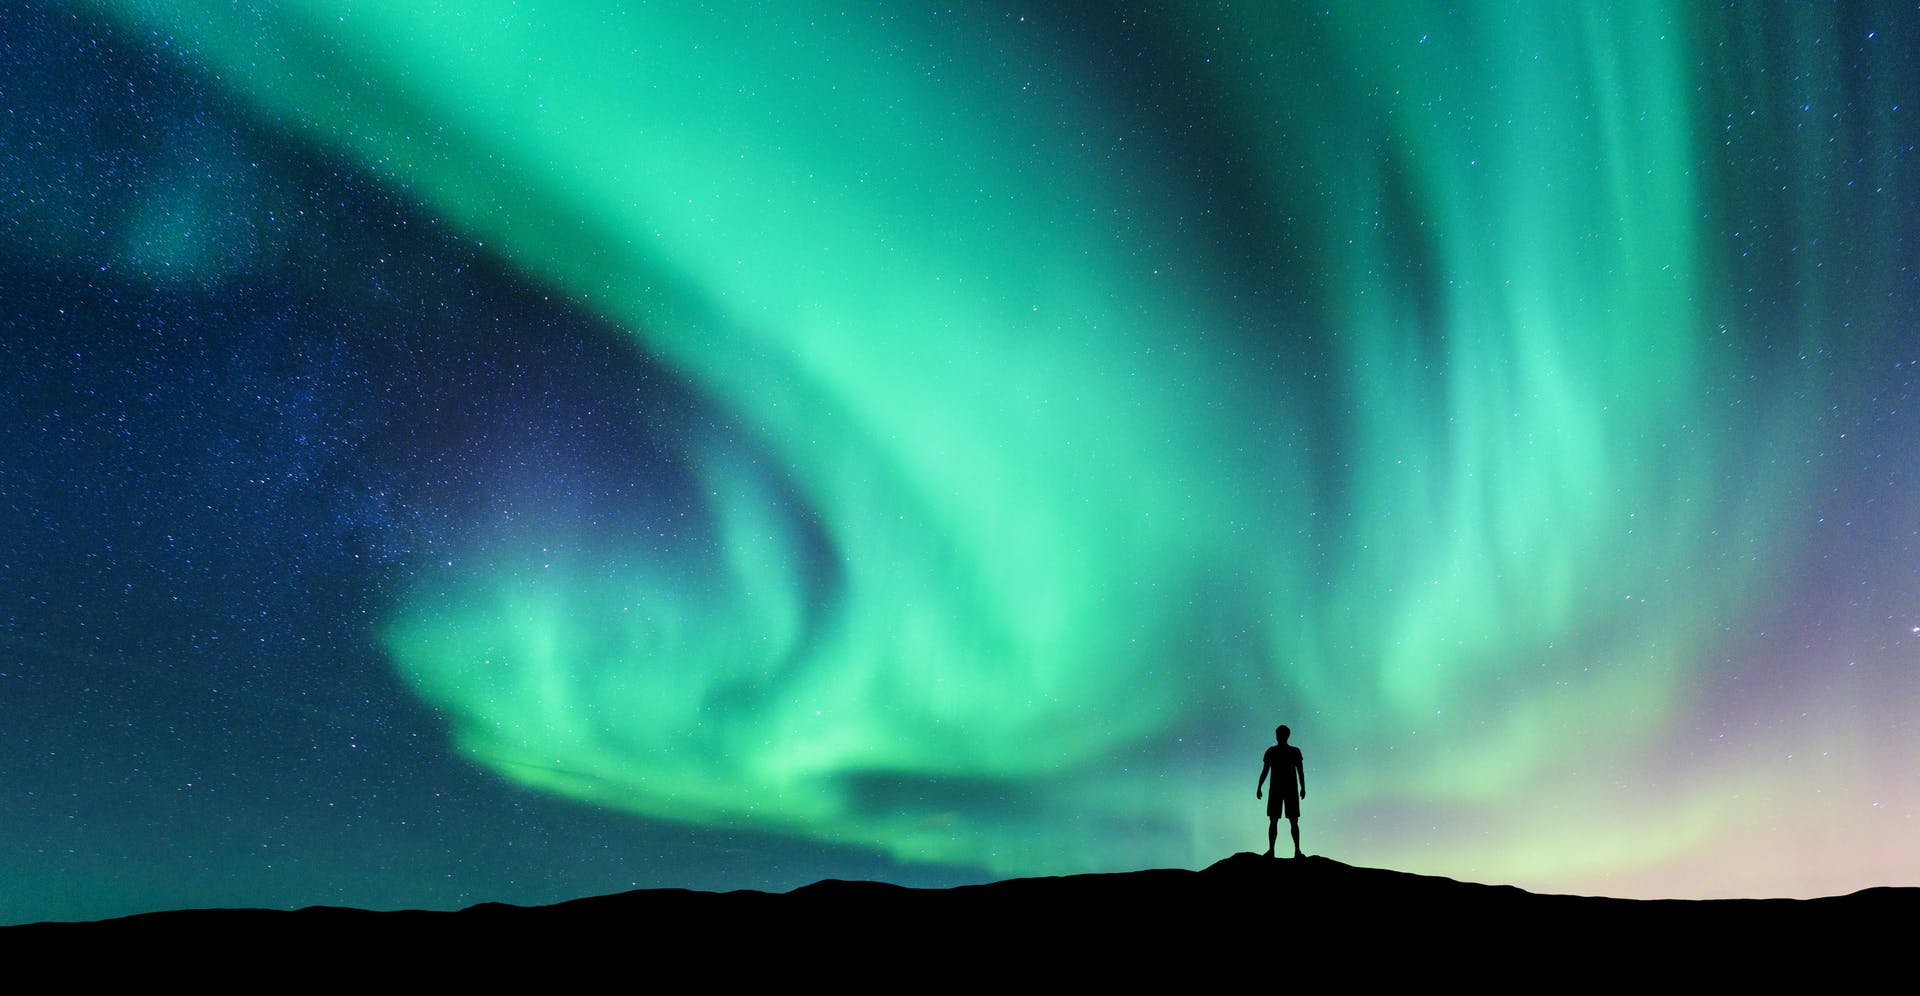 A small figure silhouetted in front of a spectacular green aurora borealis display.